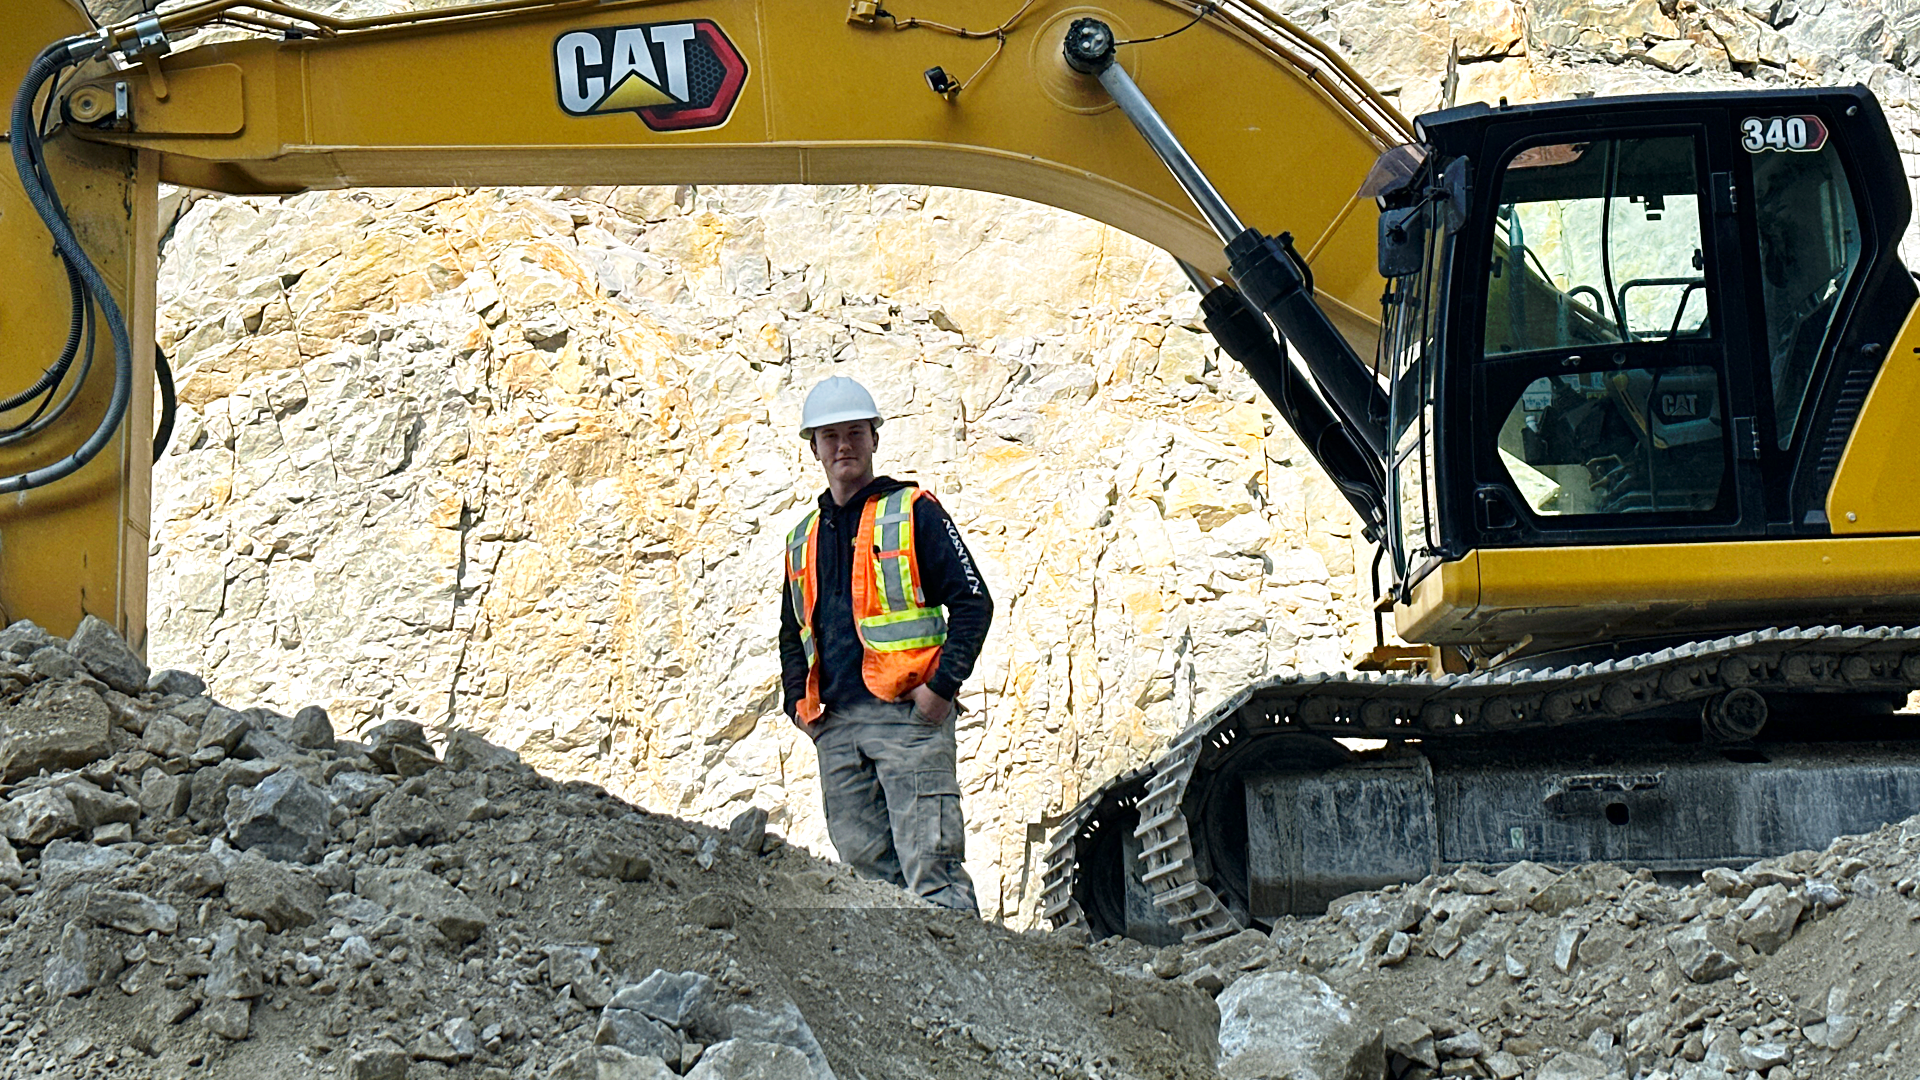 Excavation N. Jeanson: Proud Owners of the New Cat 340